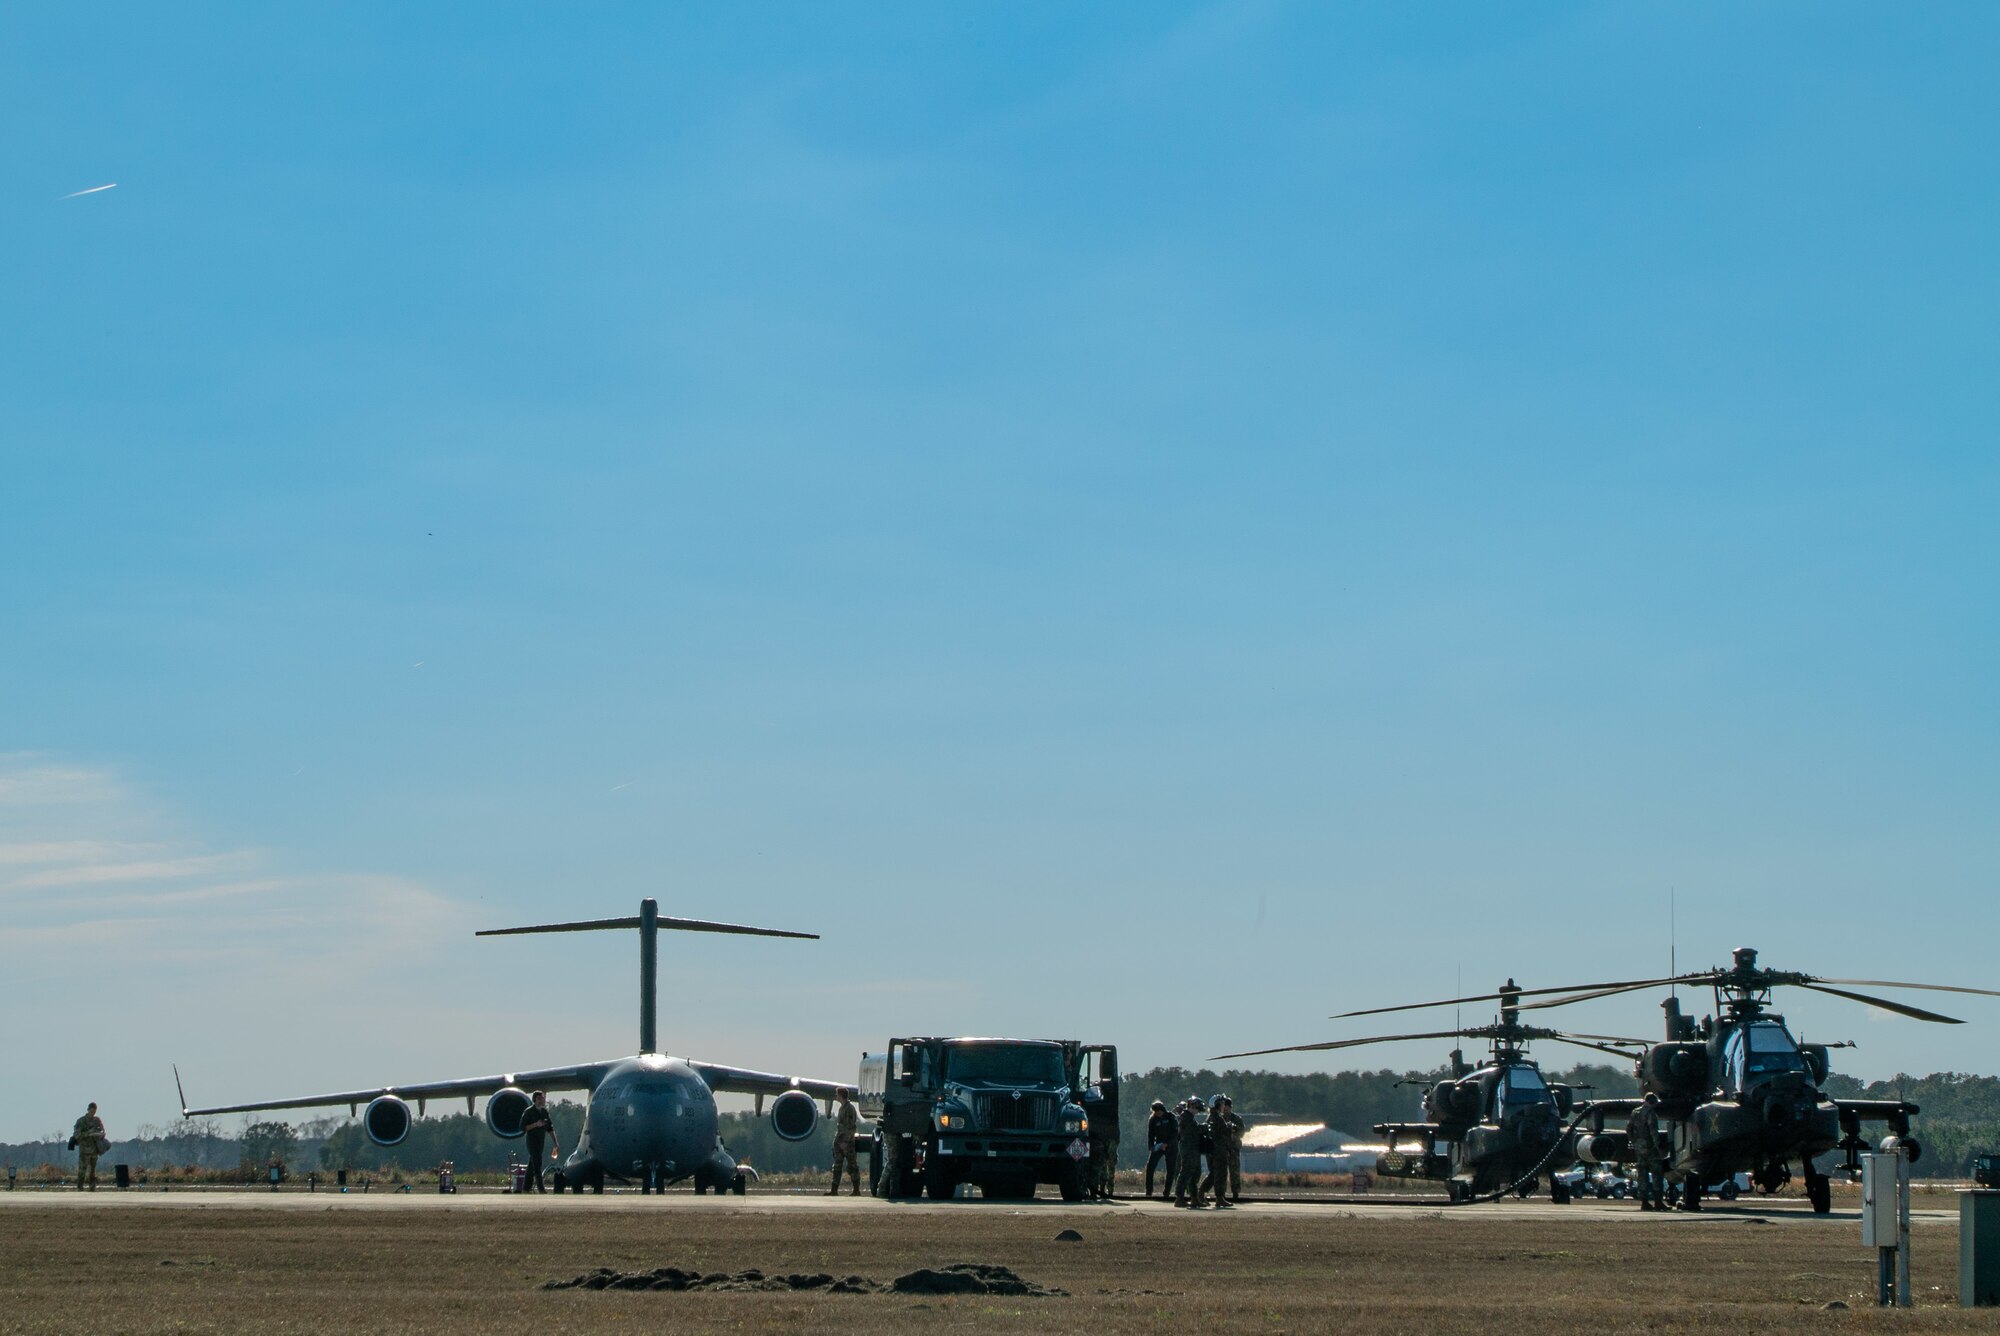 A photo of a C-17, refueling truck and two Apache helicopters